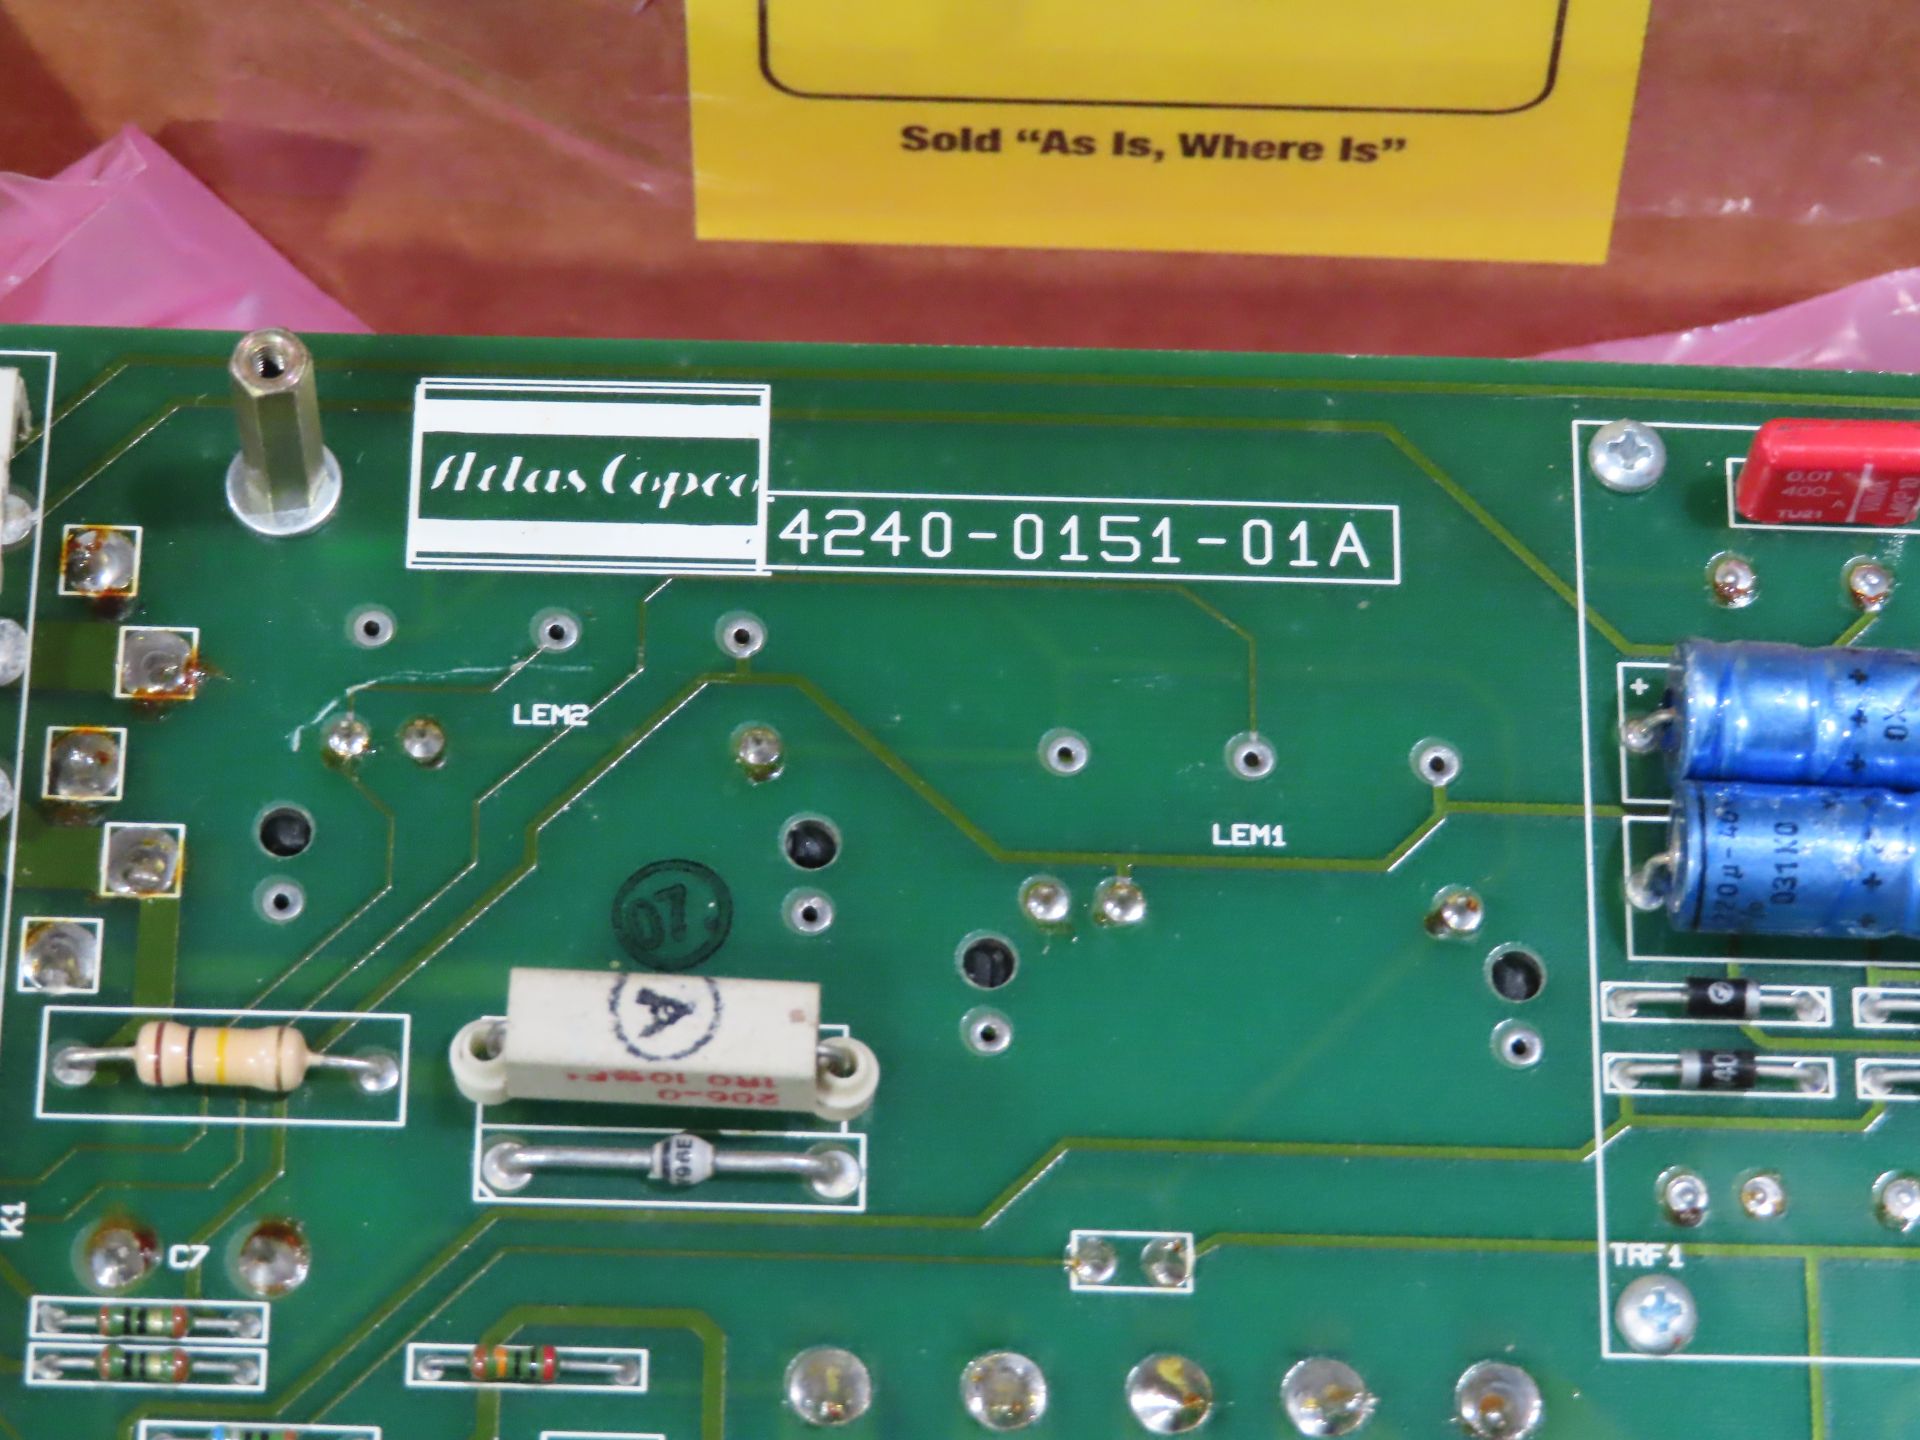 Qty 3 Altas Copco model 4240-0151-01A replacement servo amp replacement board, as always, with - Image 2 of 2